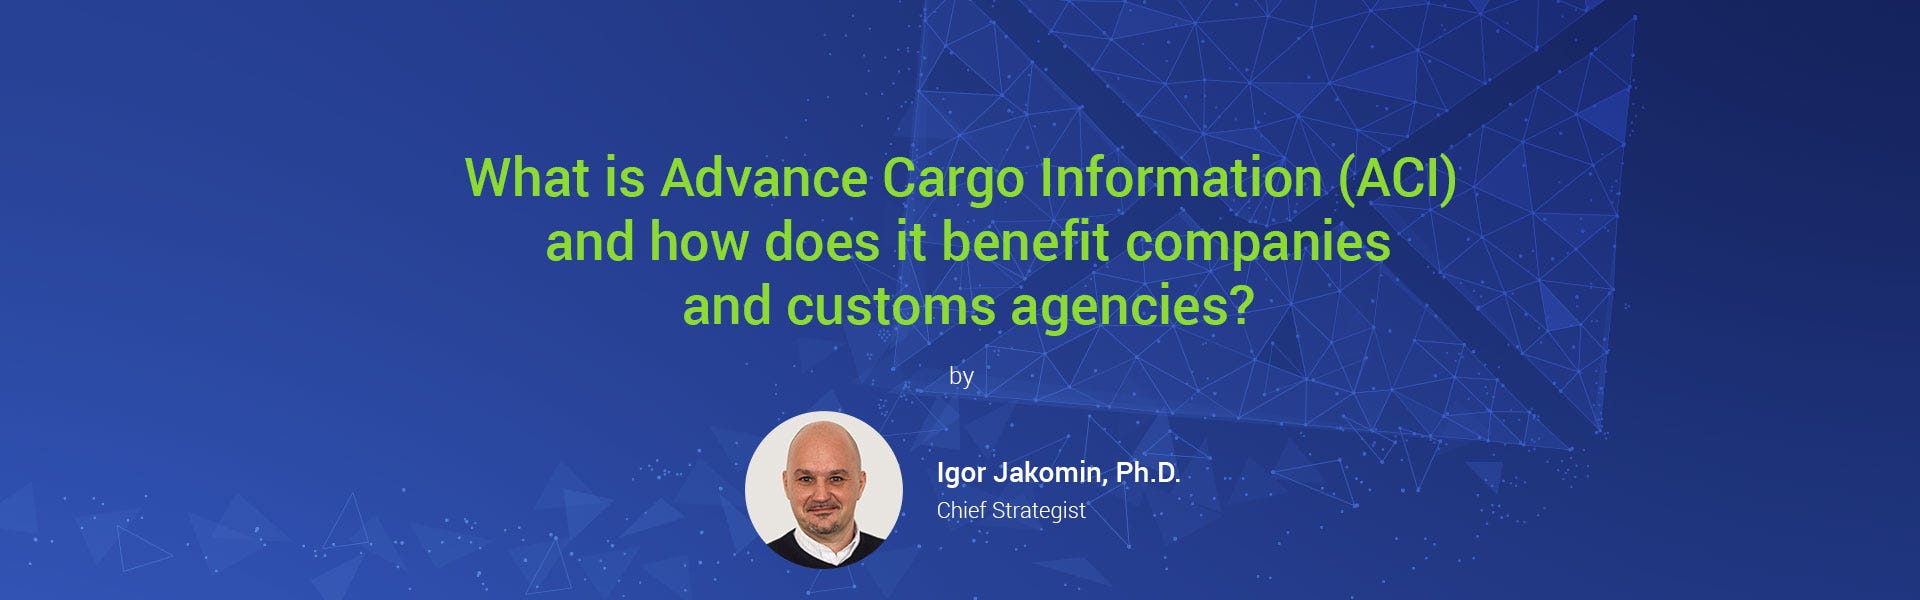 What is Advance Cargo Information (ACI) and how does it benefit companies  and customs agencies? | by CargoX Official | CargoX Platform for Blockchain  Document Transfer (BDT) | Medium